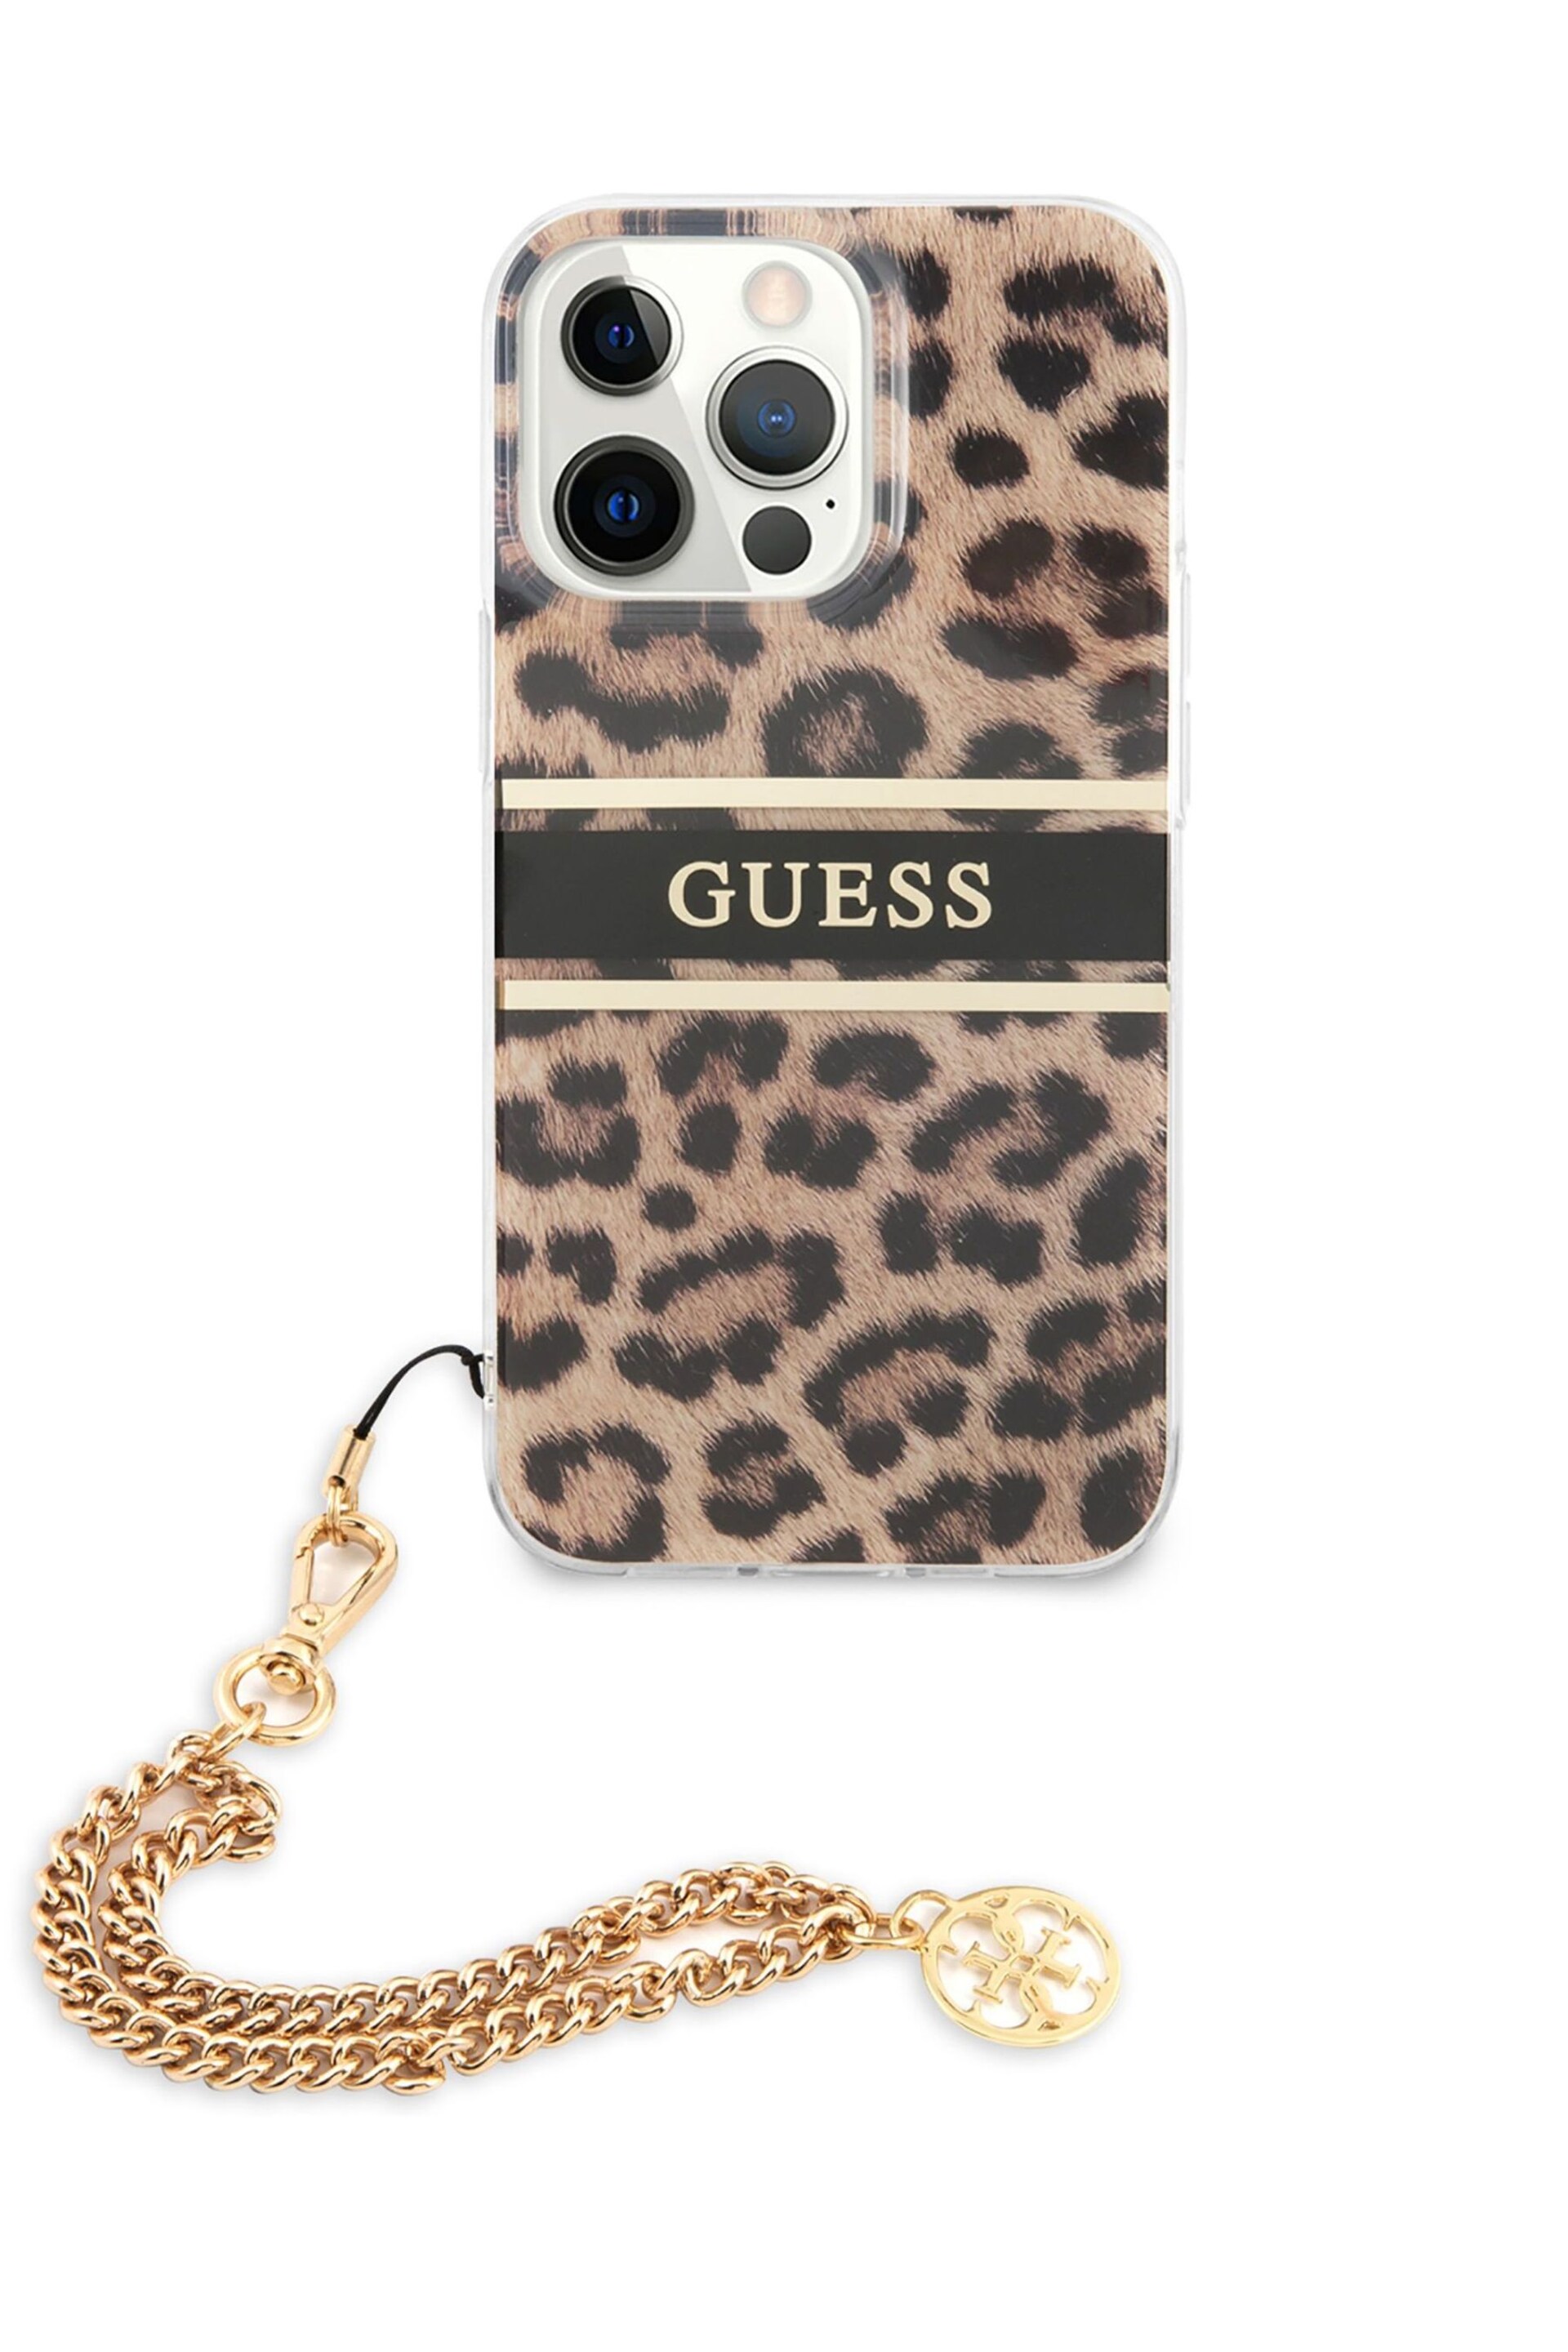 Guess Natural iPhone 13 Pro Case - Pc/Tpu Stripe with Charm Chain - Image 1 of 8